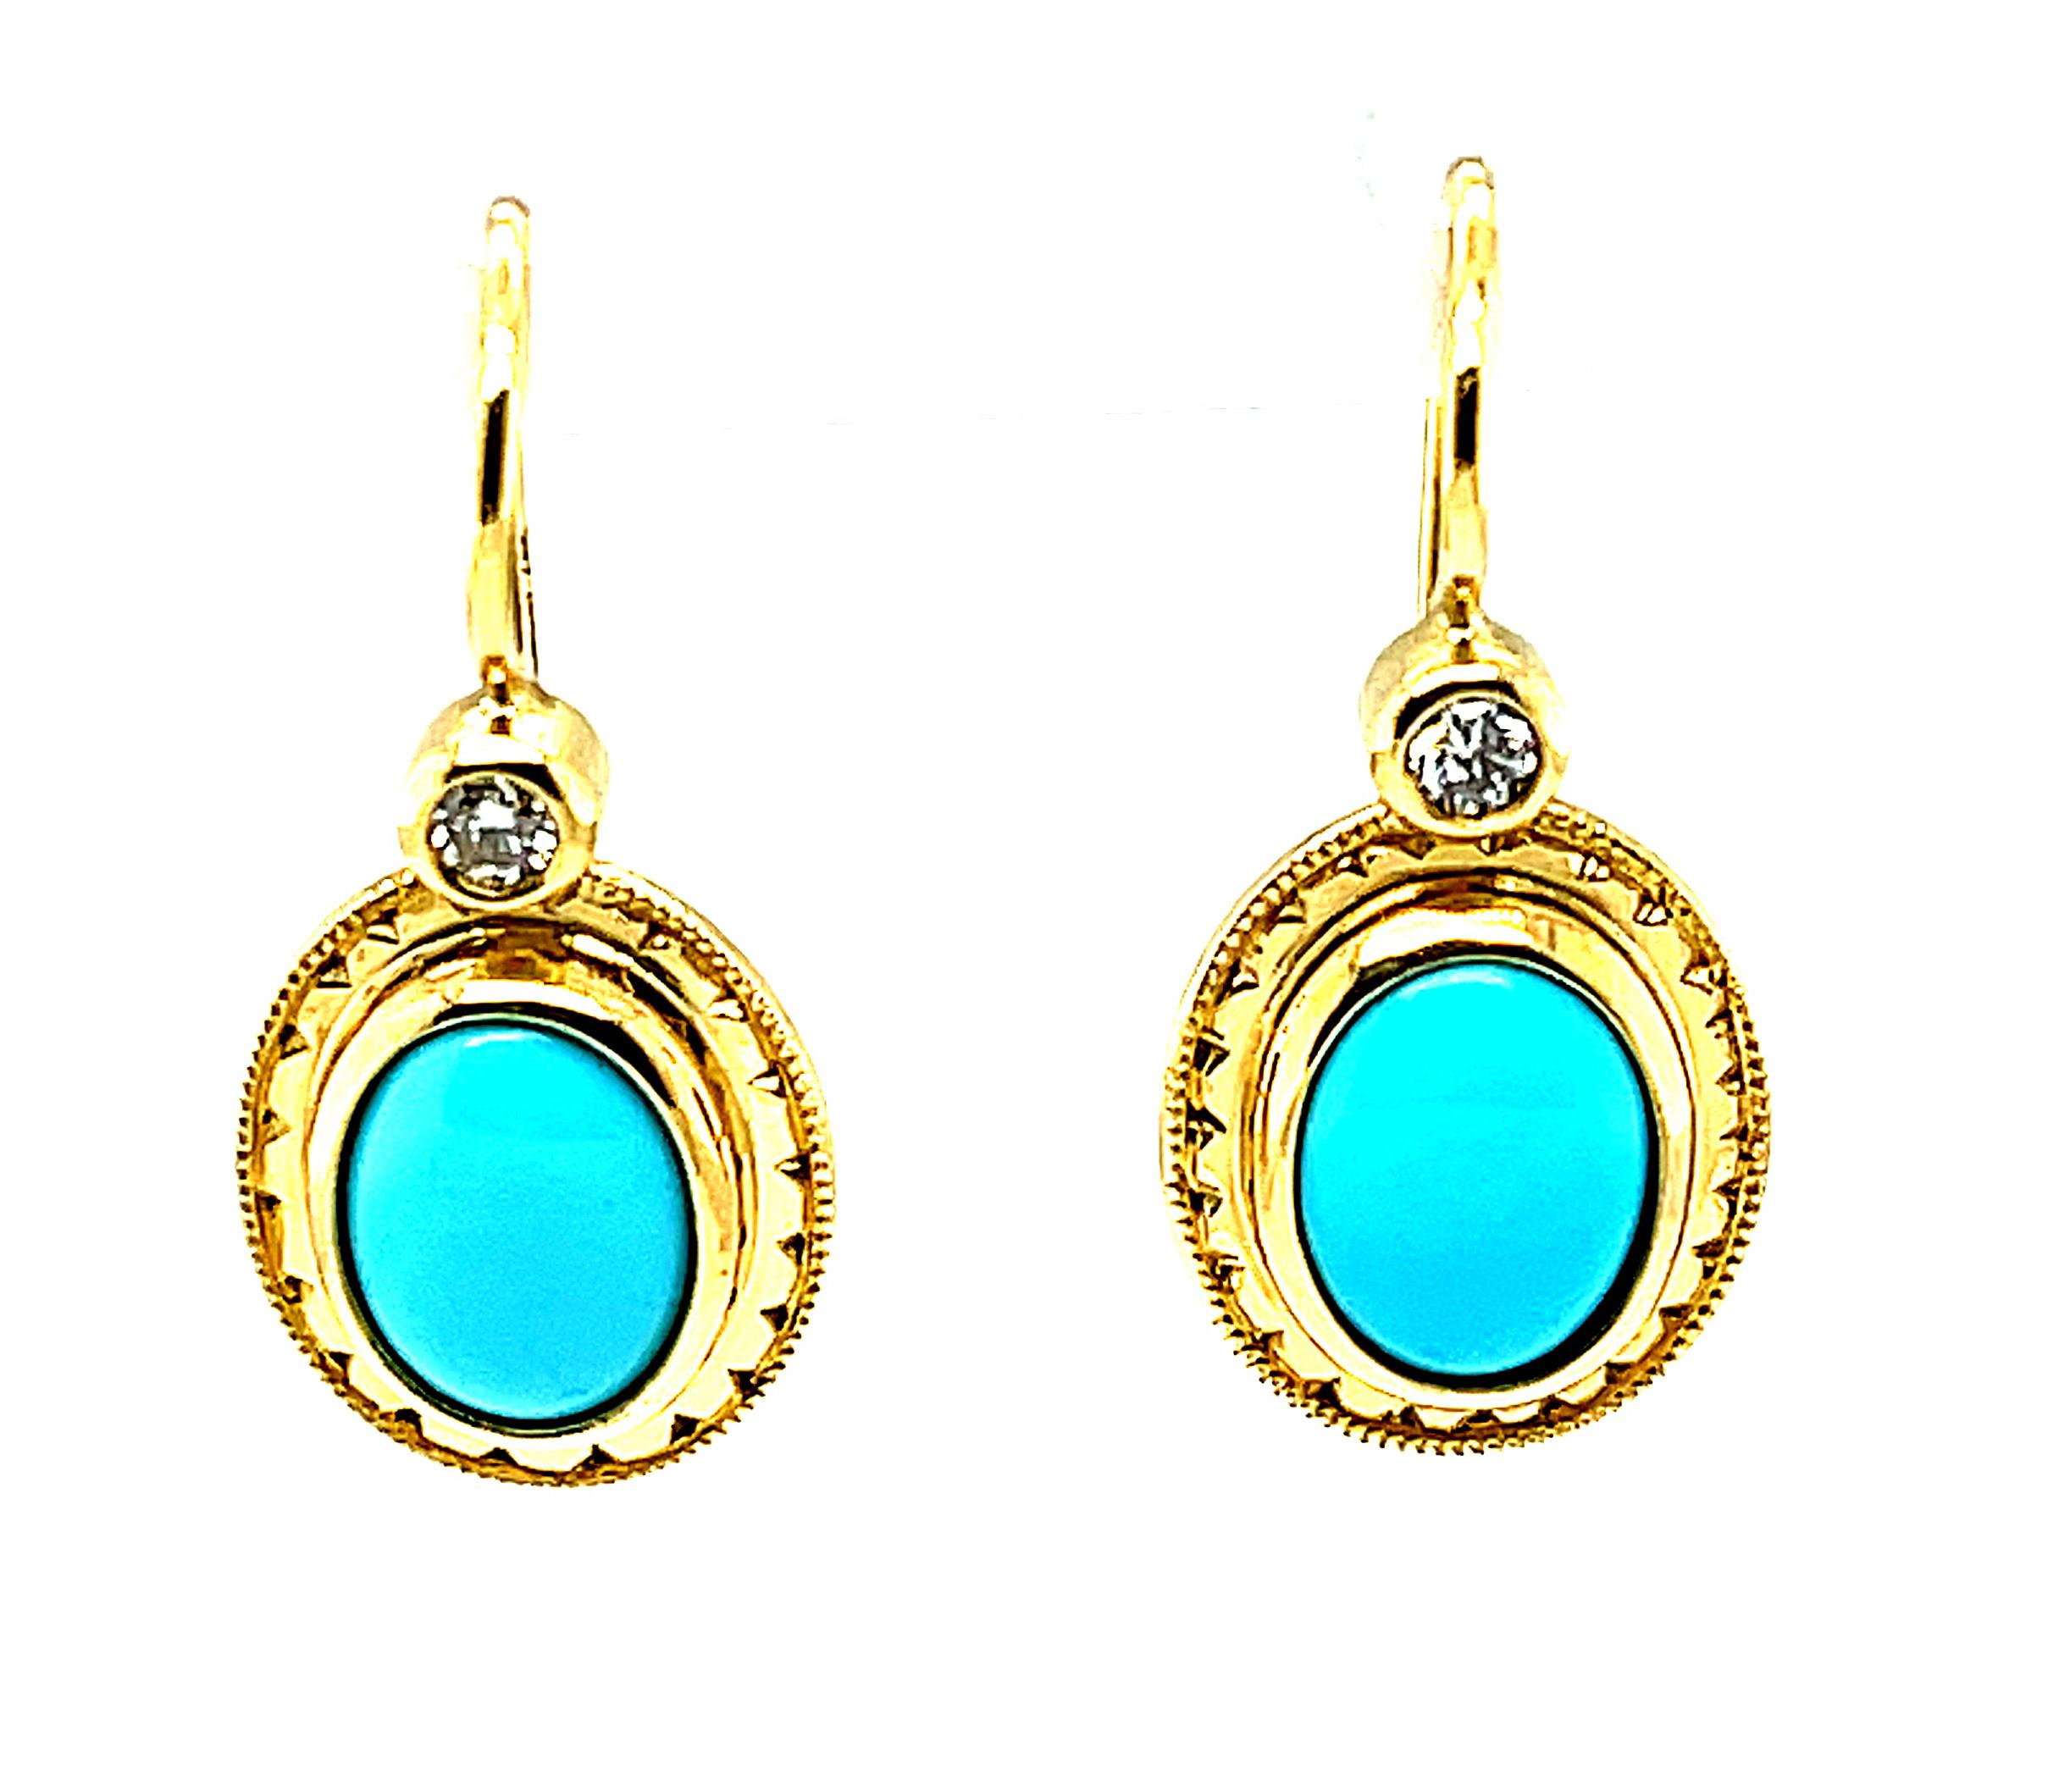 These beautiful drop earrings feature bezel set turquoise from the famous Sleeping Beauty Mine, renowned for its 